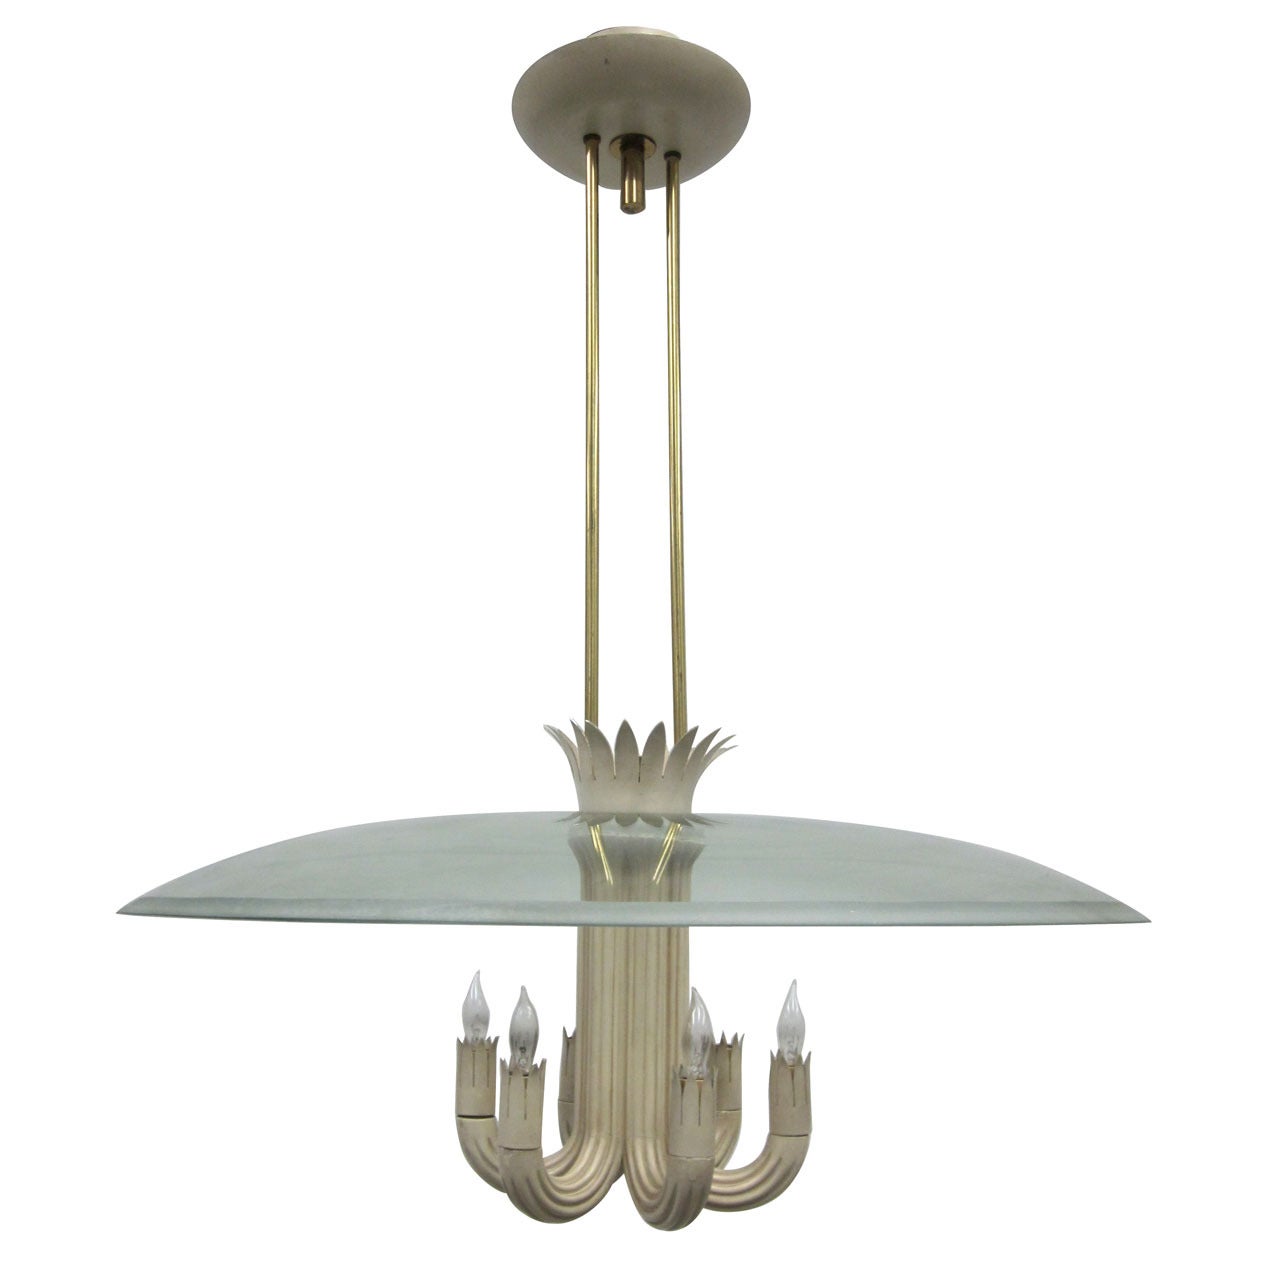 An elegant, sober Italian midcentury pendant / chandelier designed by Pietro Chiesa for Fontana Arte in the Modern Neoclassical Style (Novecento) with six fluted arms in enameled metal arranged in a circular pattern and covered with a solid glass